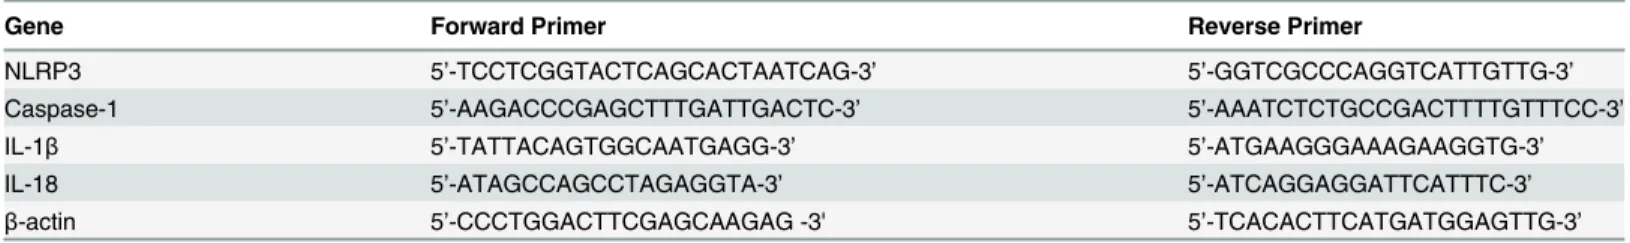 Table 1. Sequence Data for Gene Amplification in Quantitative RT-PCR.